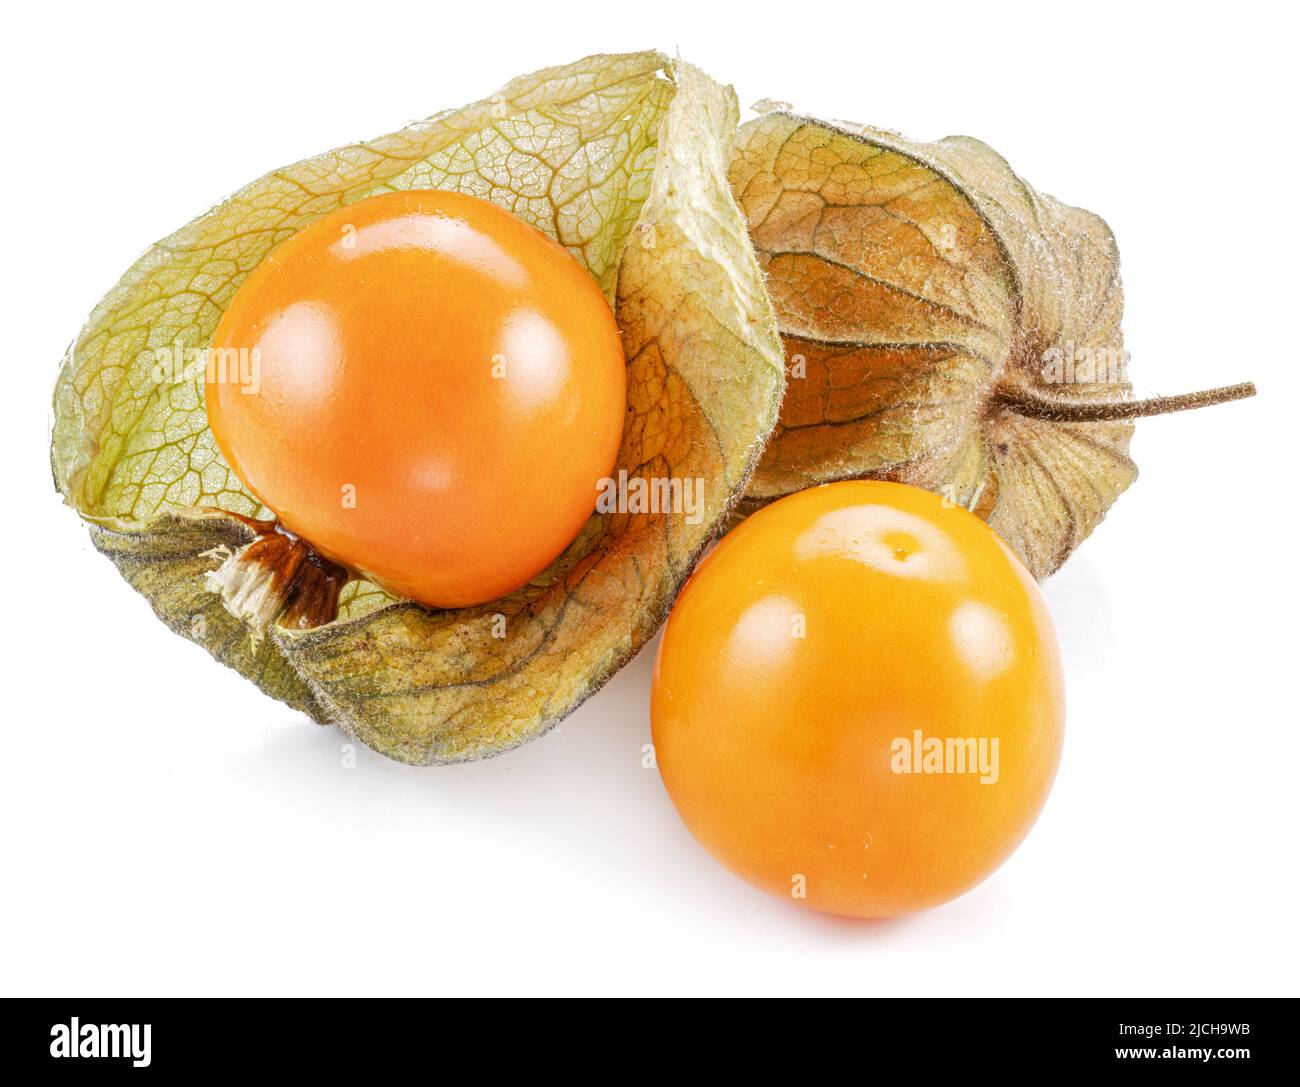 Ripe physalis or golden berry fruits in calyx isolated on white background. Stock Photo